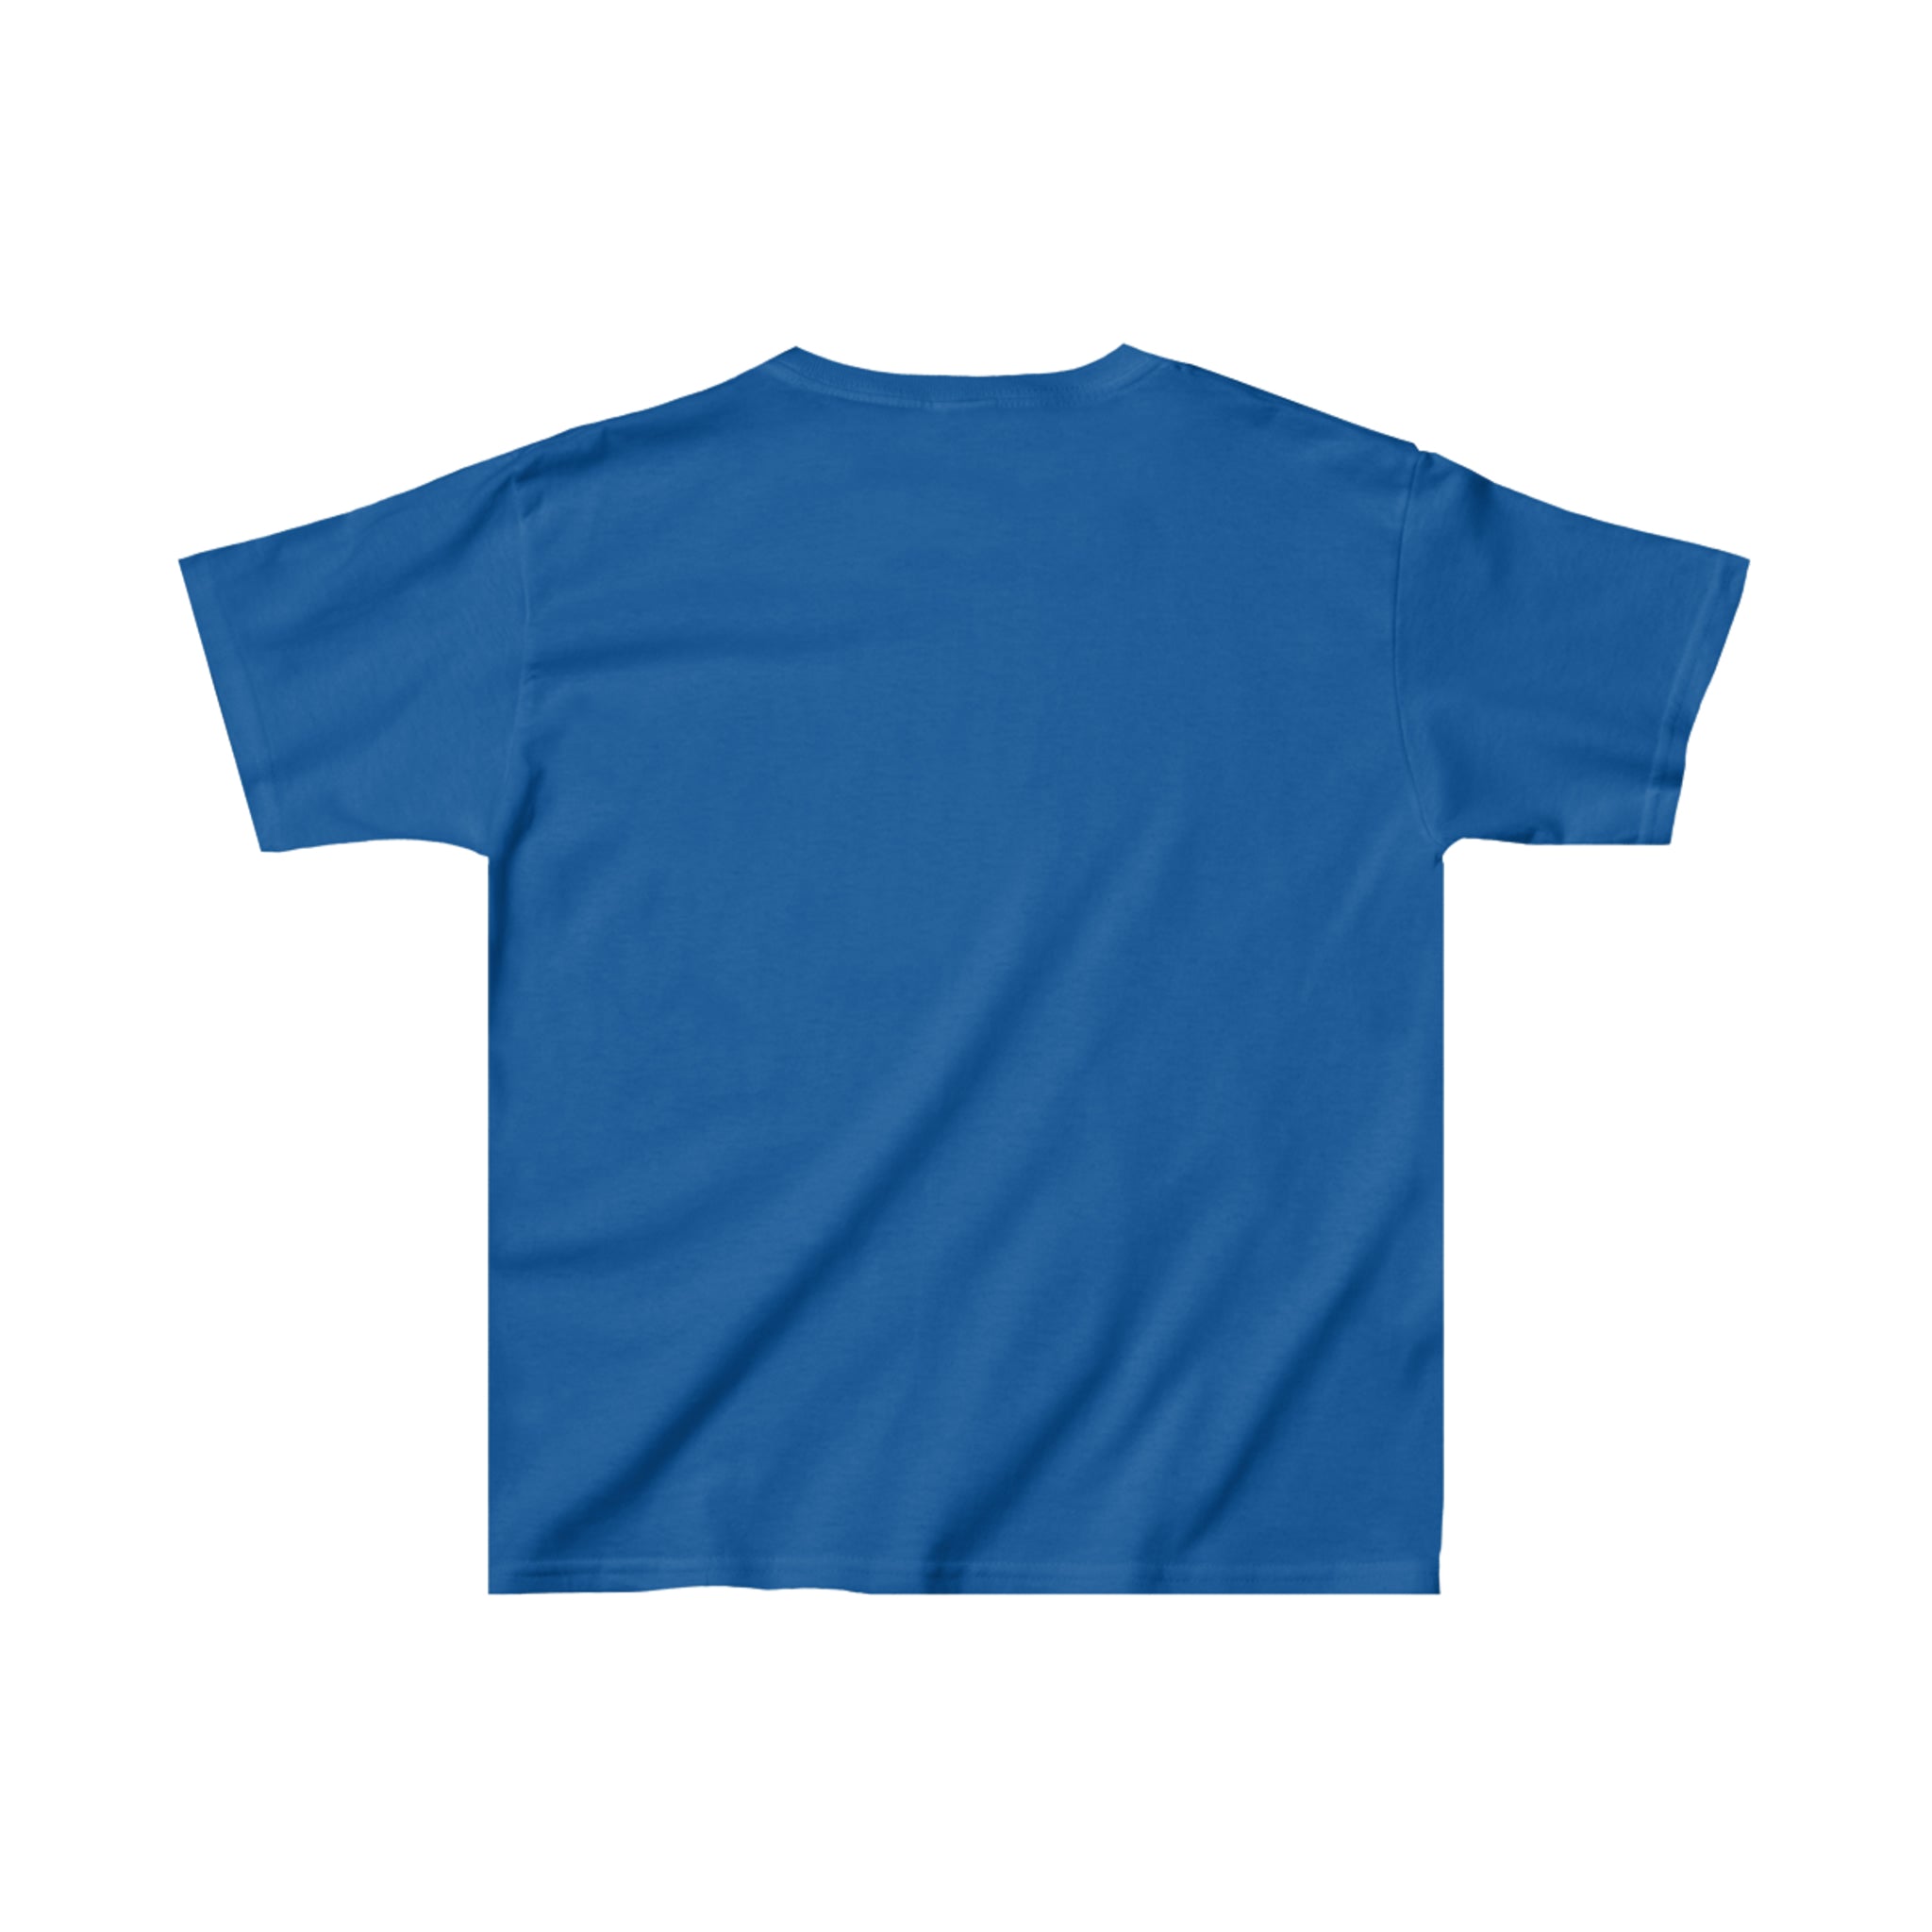 Tidewater Sharks T-Shirt (Youth)